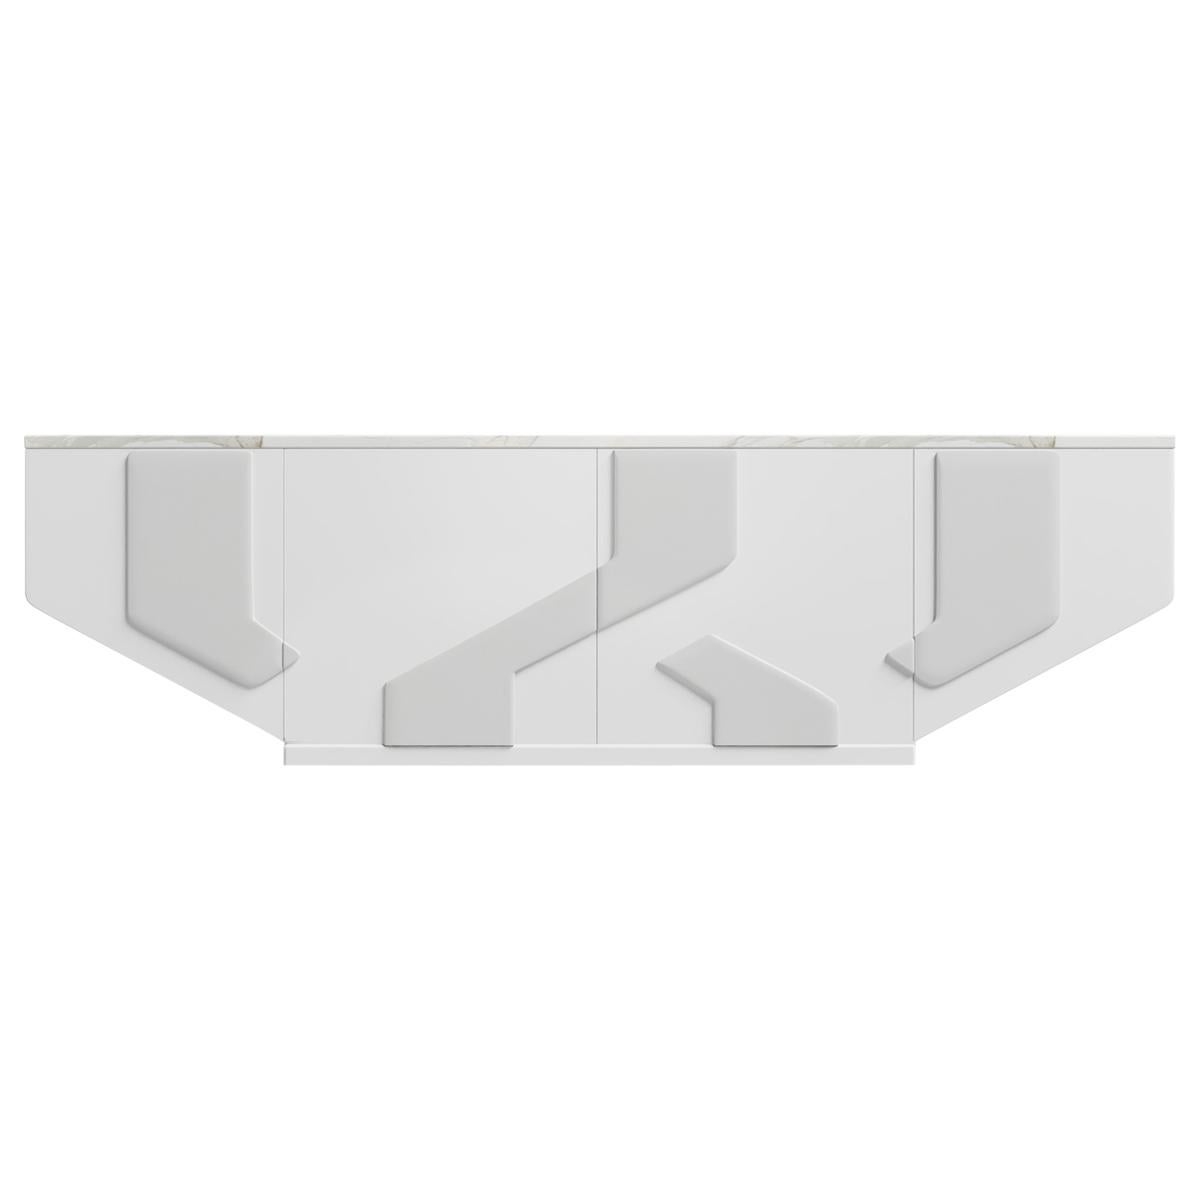 CRUZ MEDIA CREDENZA - Modern Design in White Lacquer with Snow Leather insets